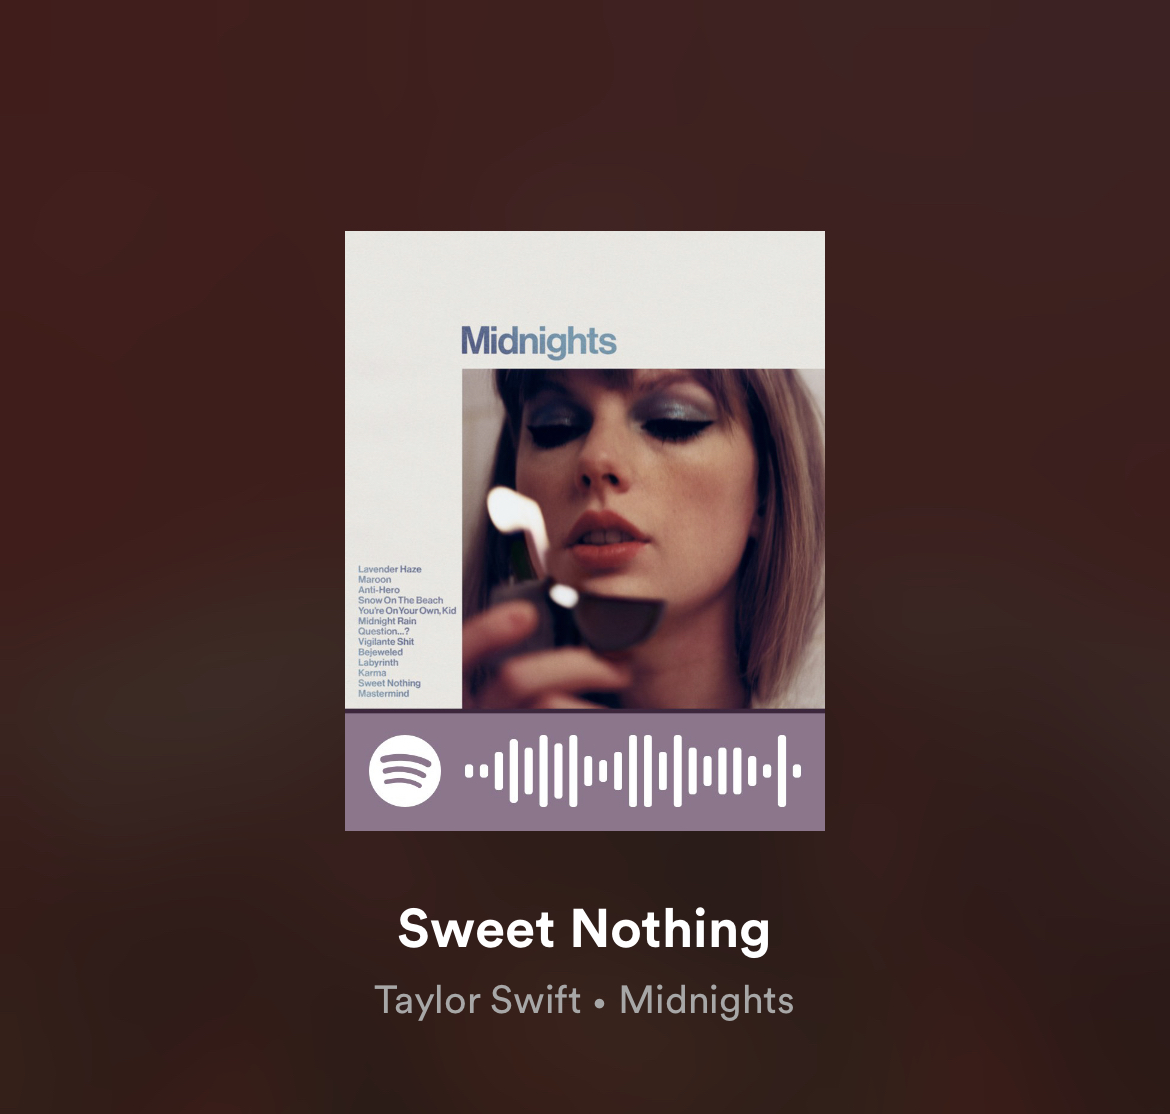 Sweet Nothing by Taylor Swift